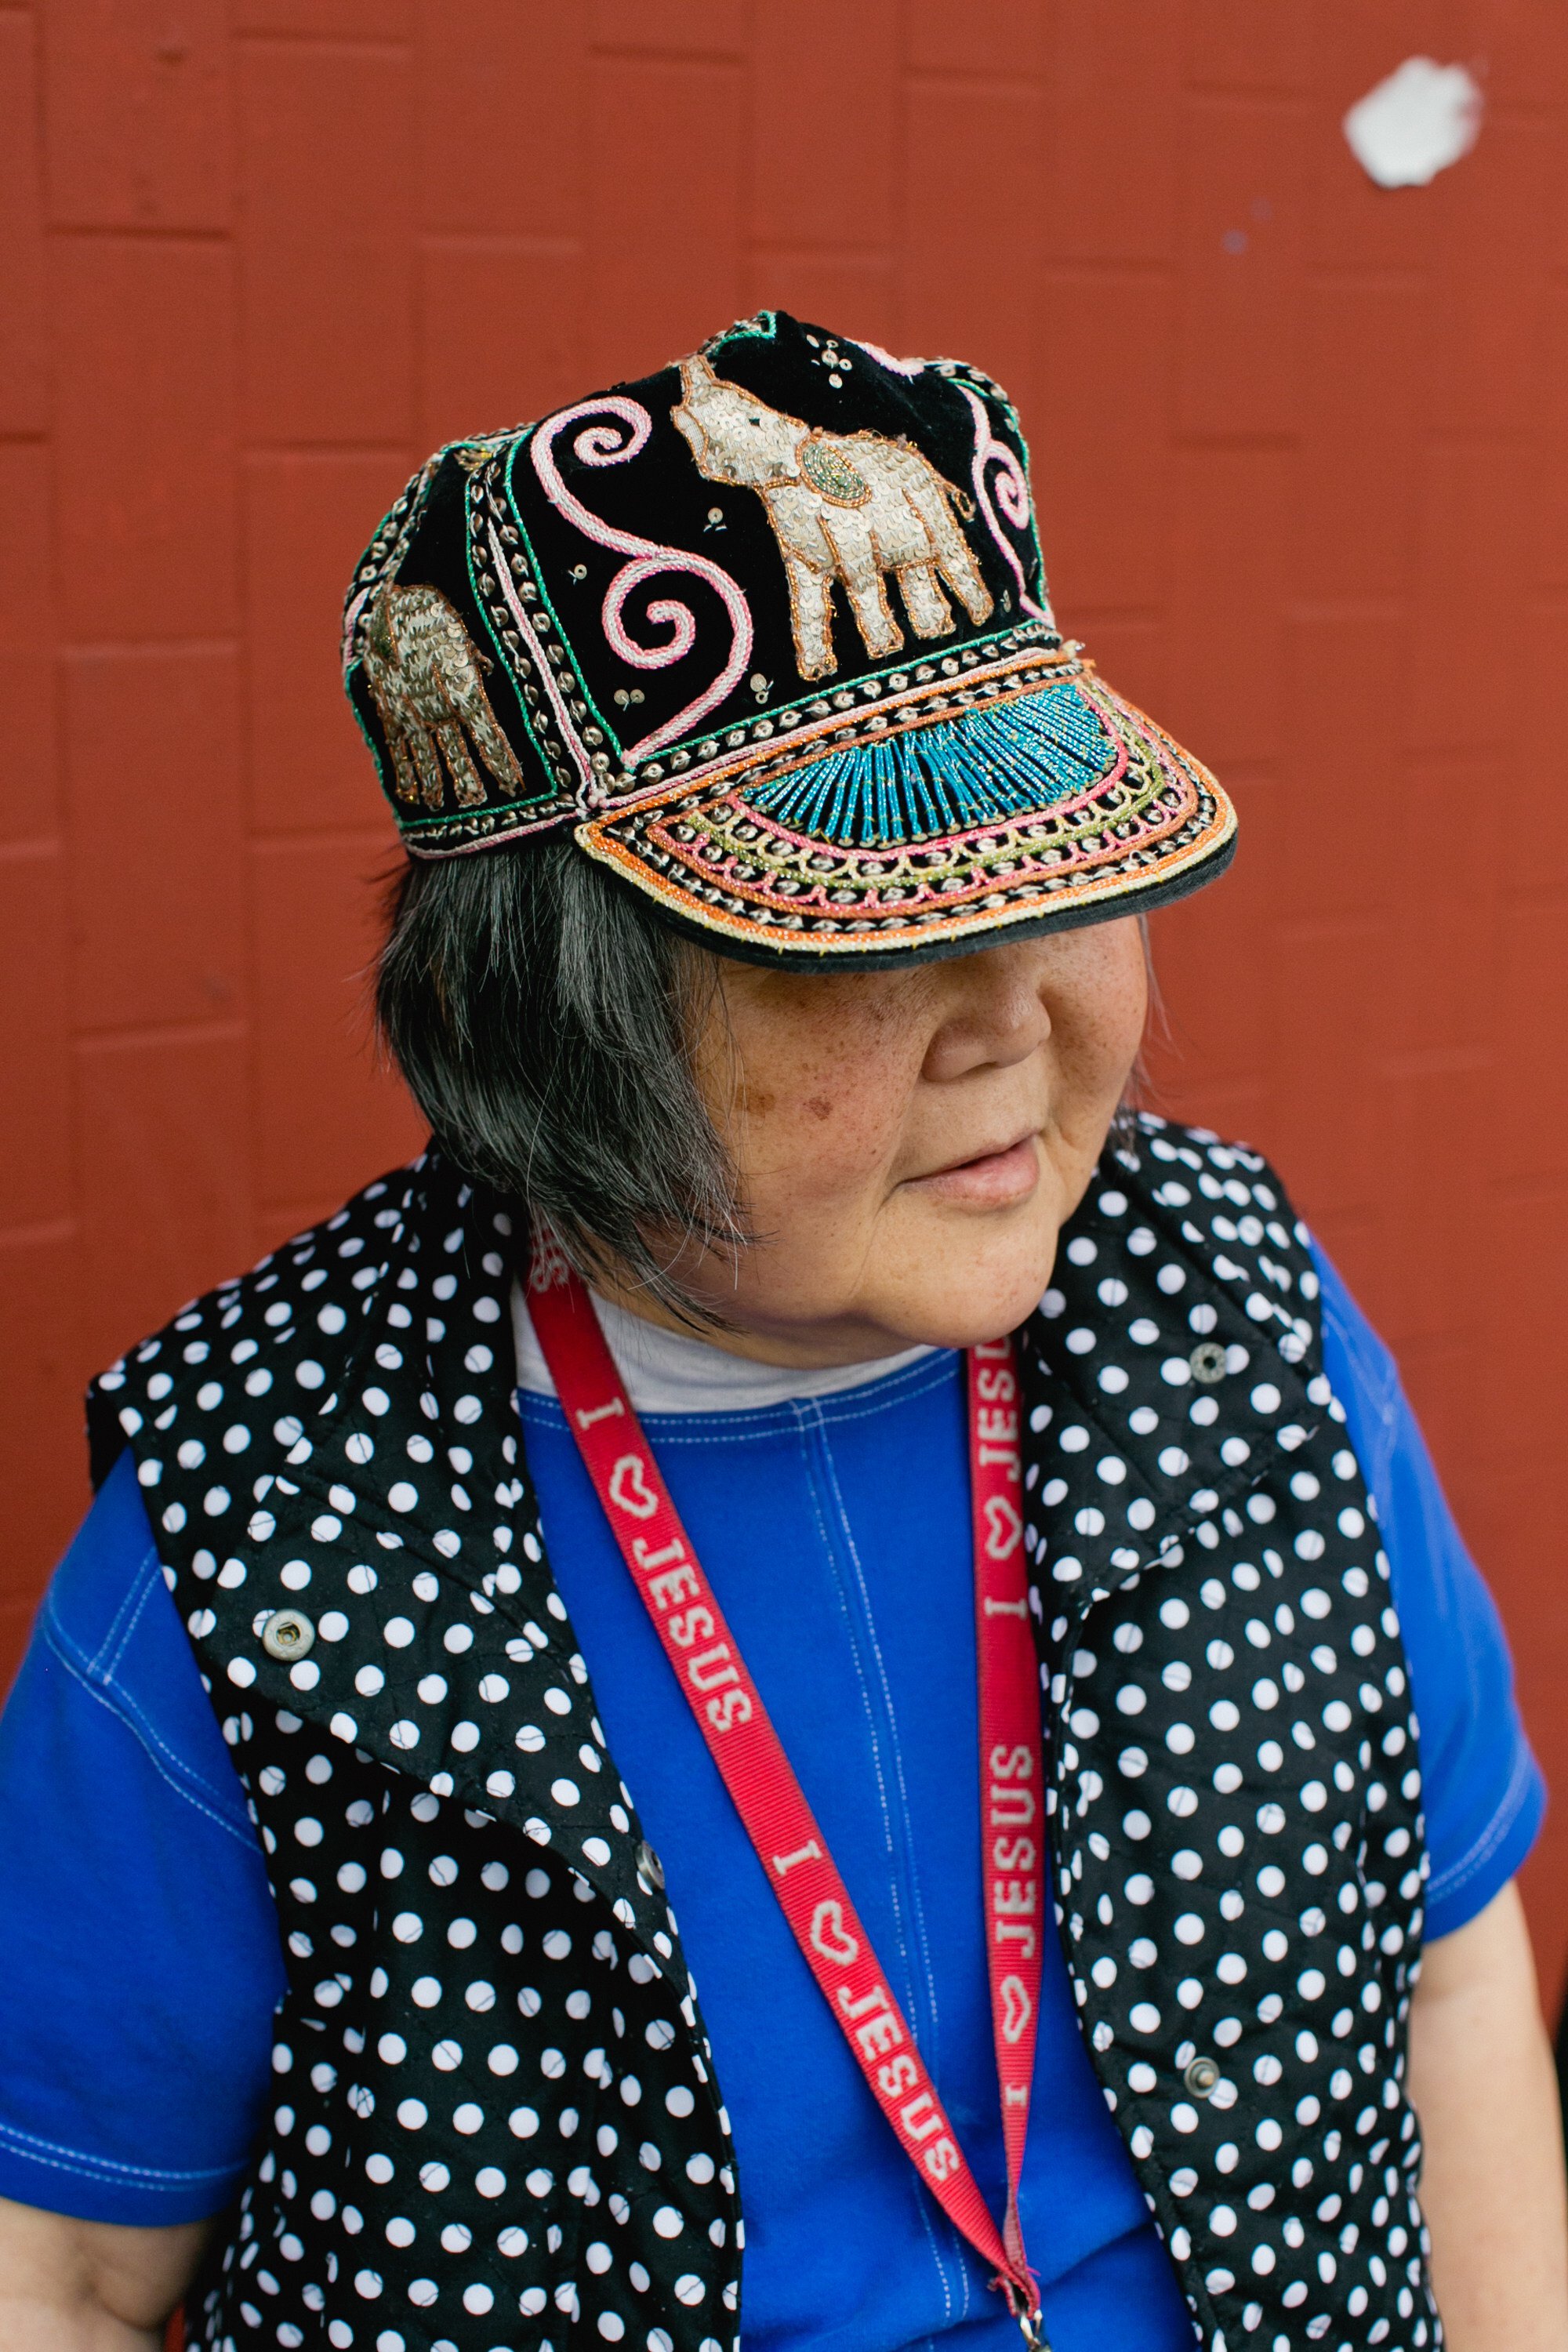 Angela Chen in Oakland, California, one of the stylish seniors featured in new book Chinatown Pretty: Fashion and Wisdom From Chinatown’s Most Stylish Seniors.